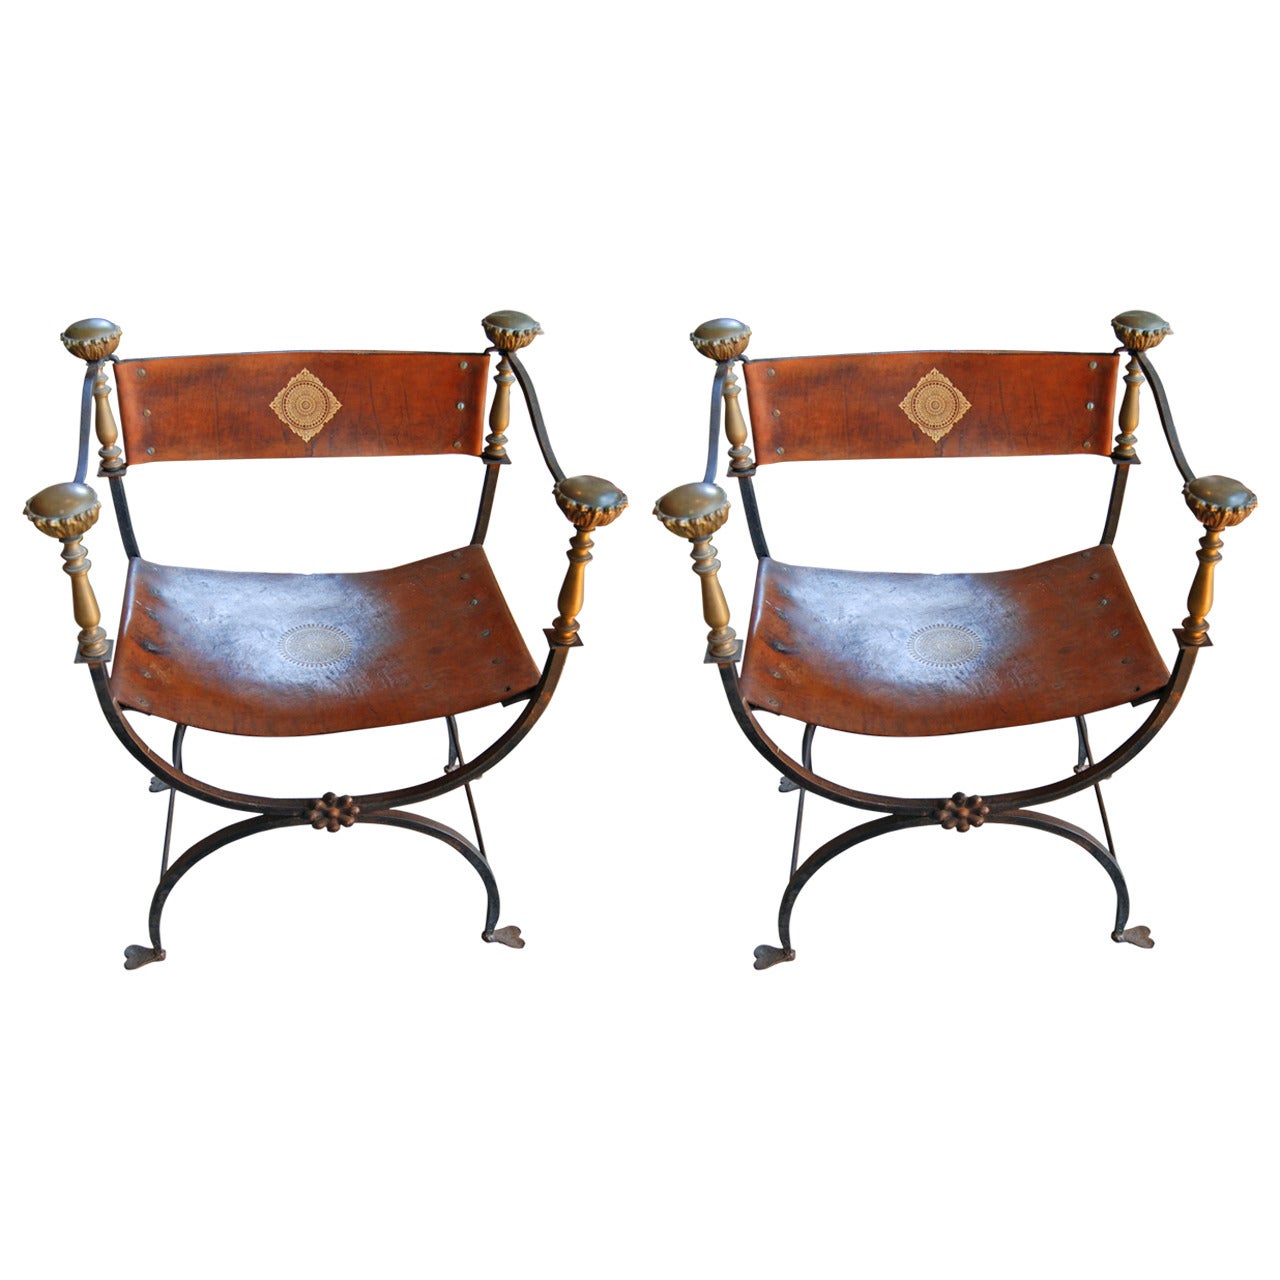 Pair of 19th Century Iron and Leather Campaign Chairs